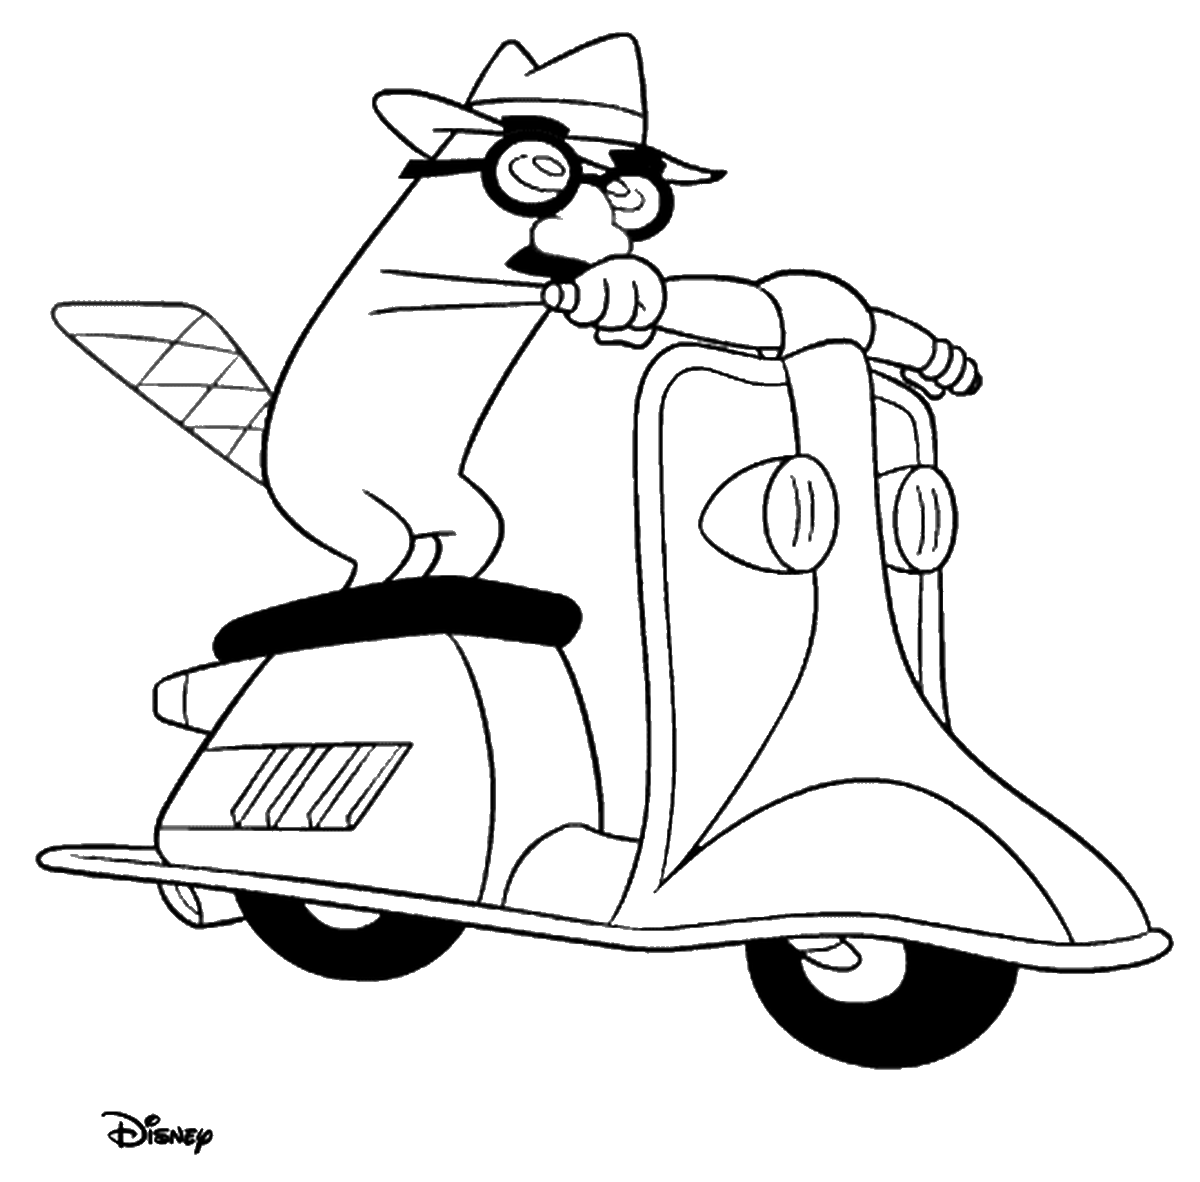 coloring pages of perry the platypus from phineas and ferb